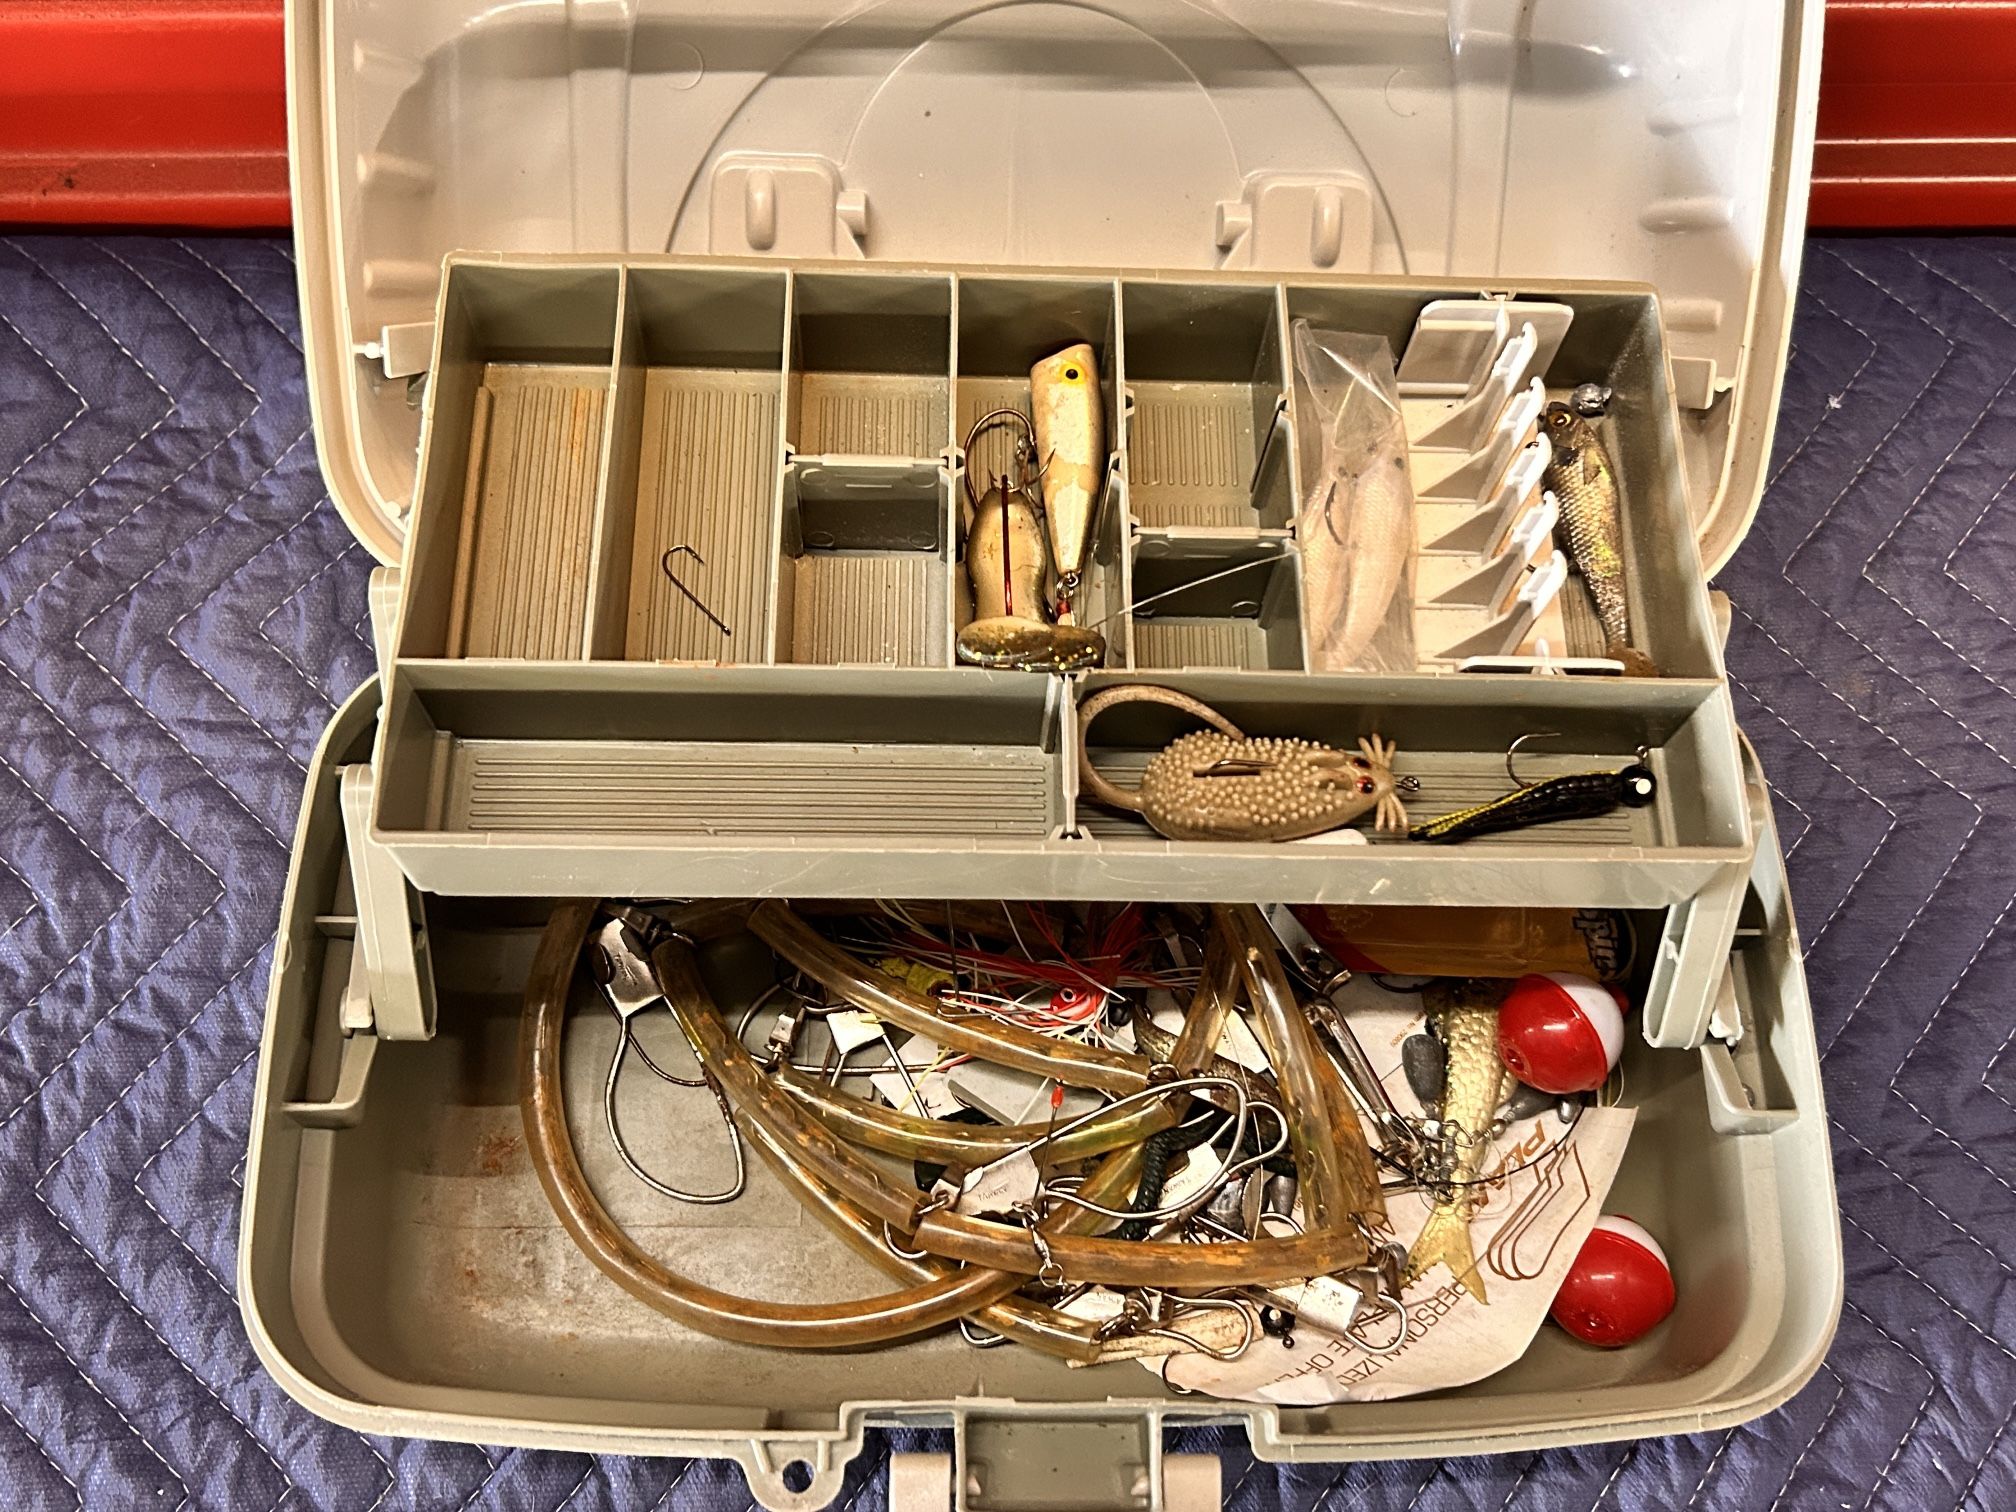 $5 for (1) Fishing Tackle Box w/Accessories for Sale in Orlando